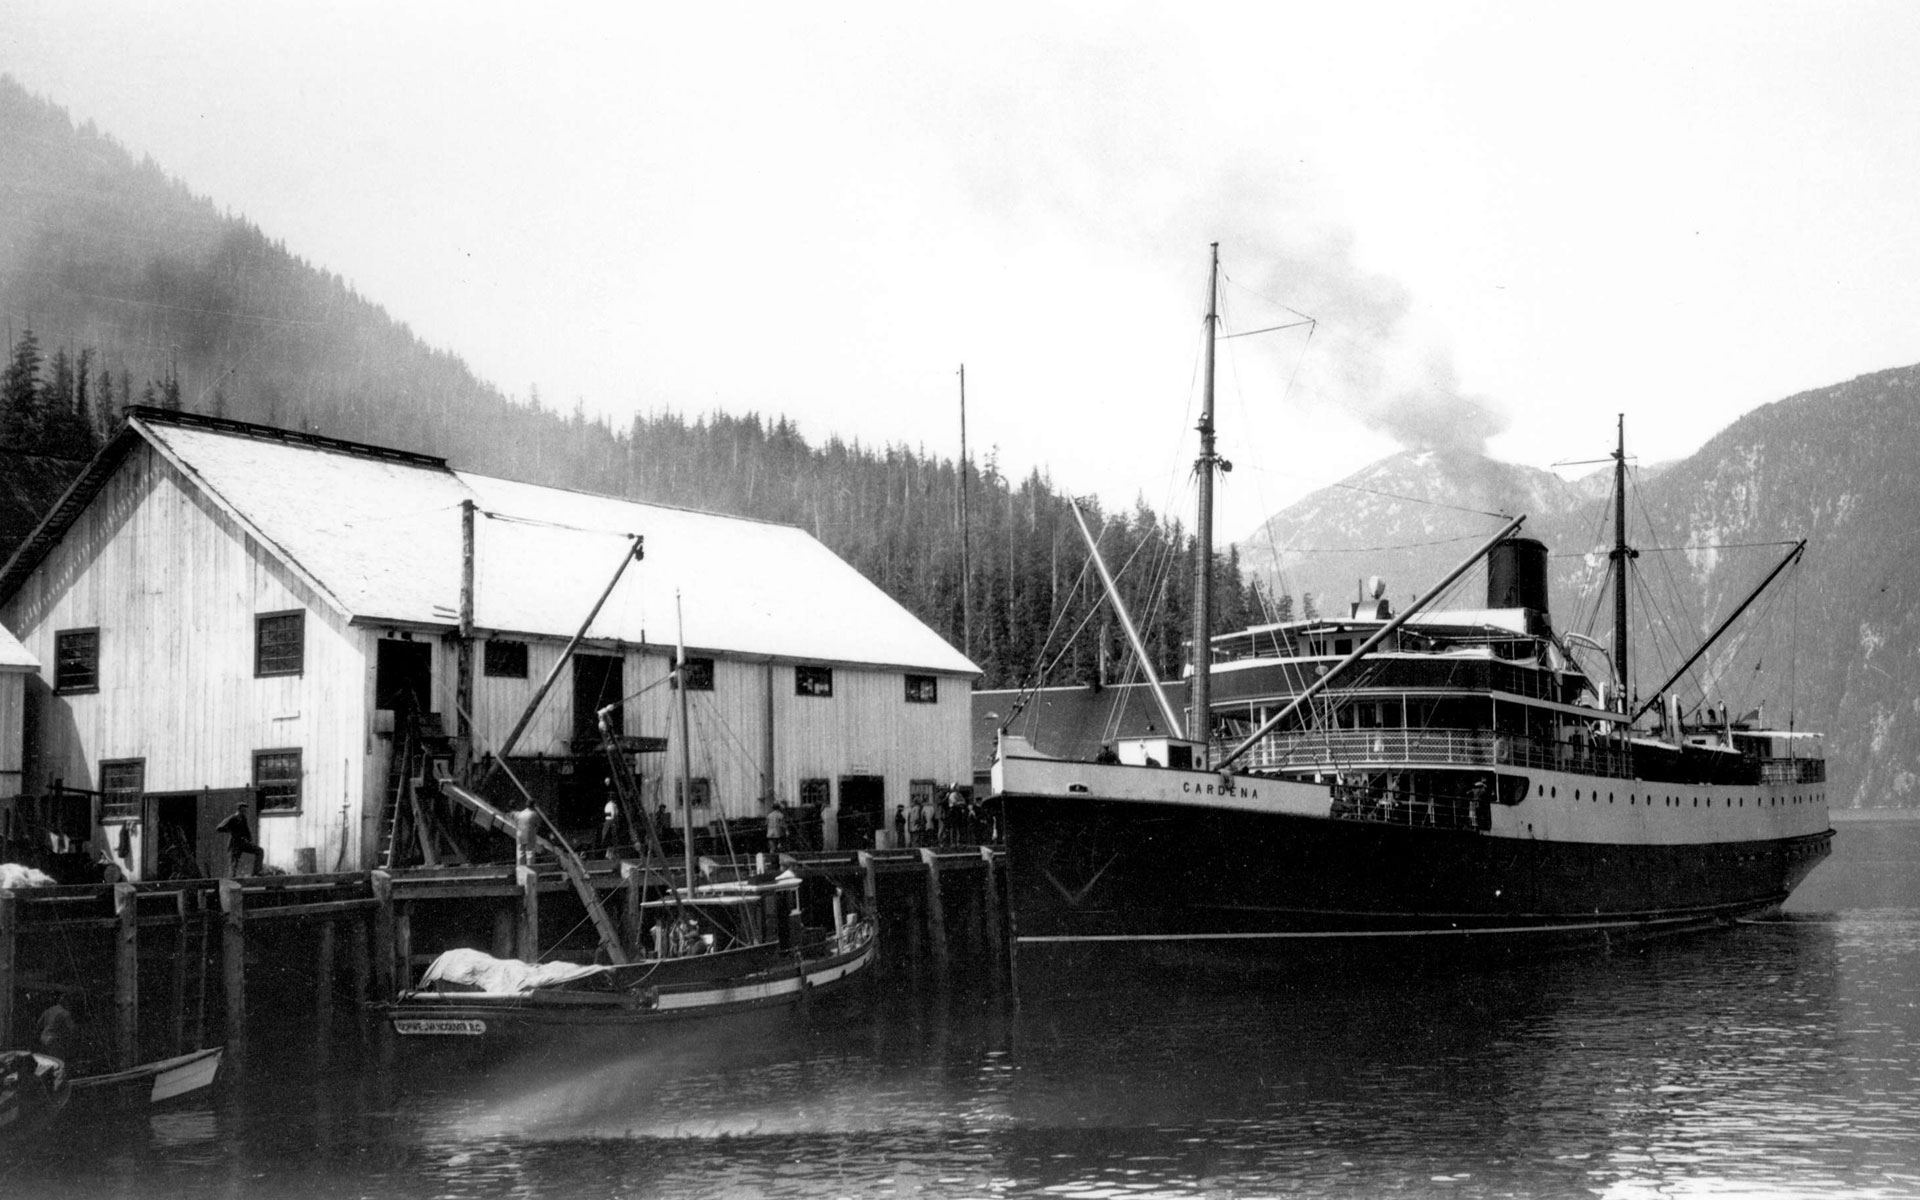 Cannery building with large steamship docked at the wharf.